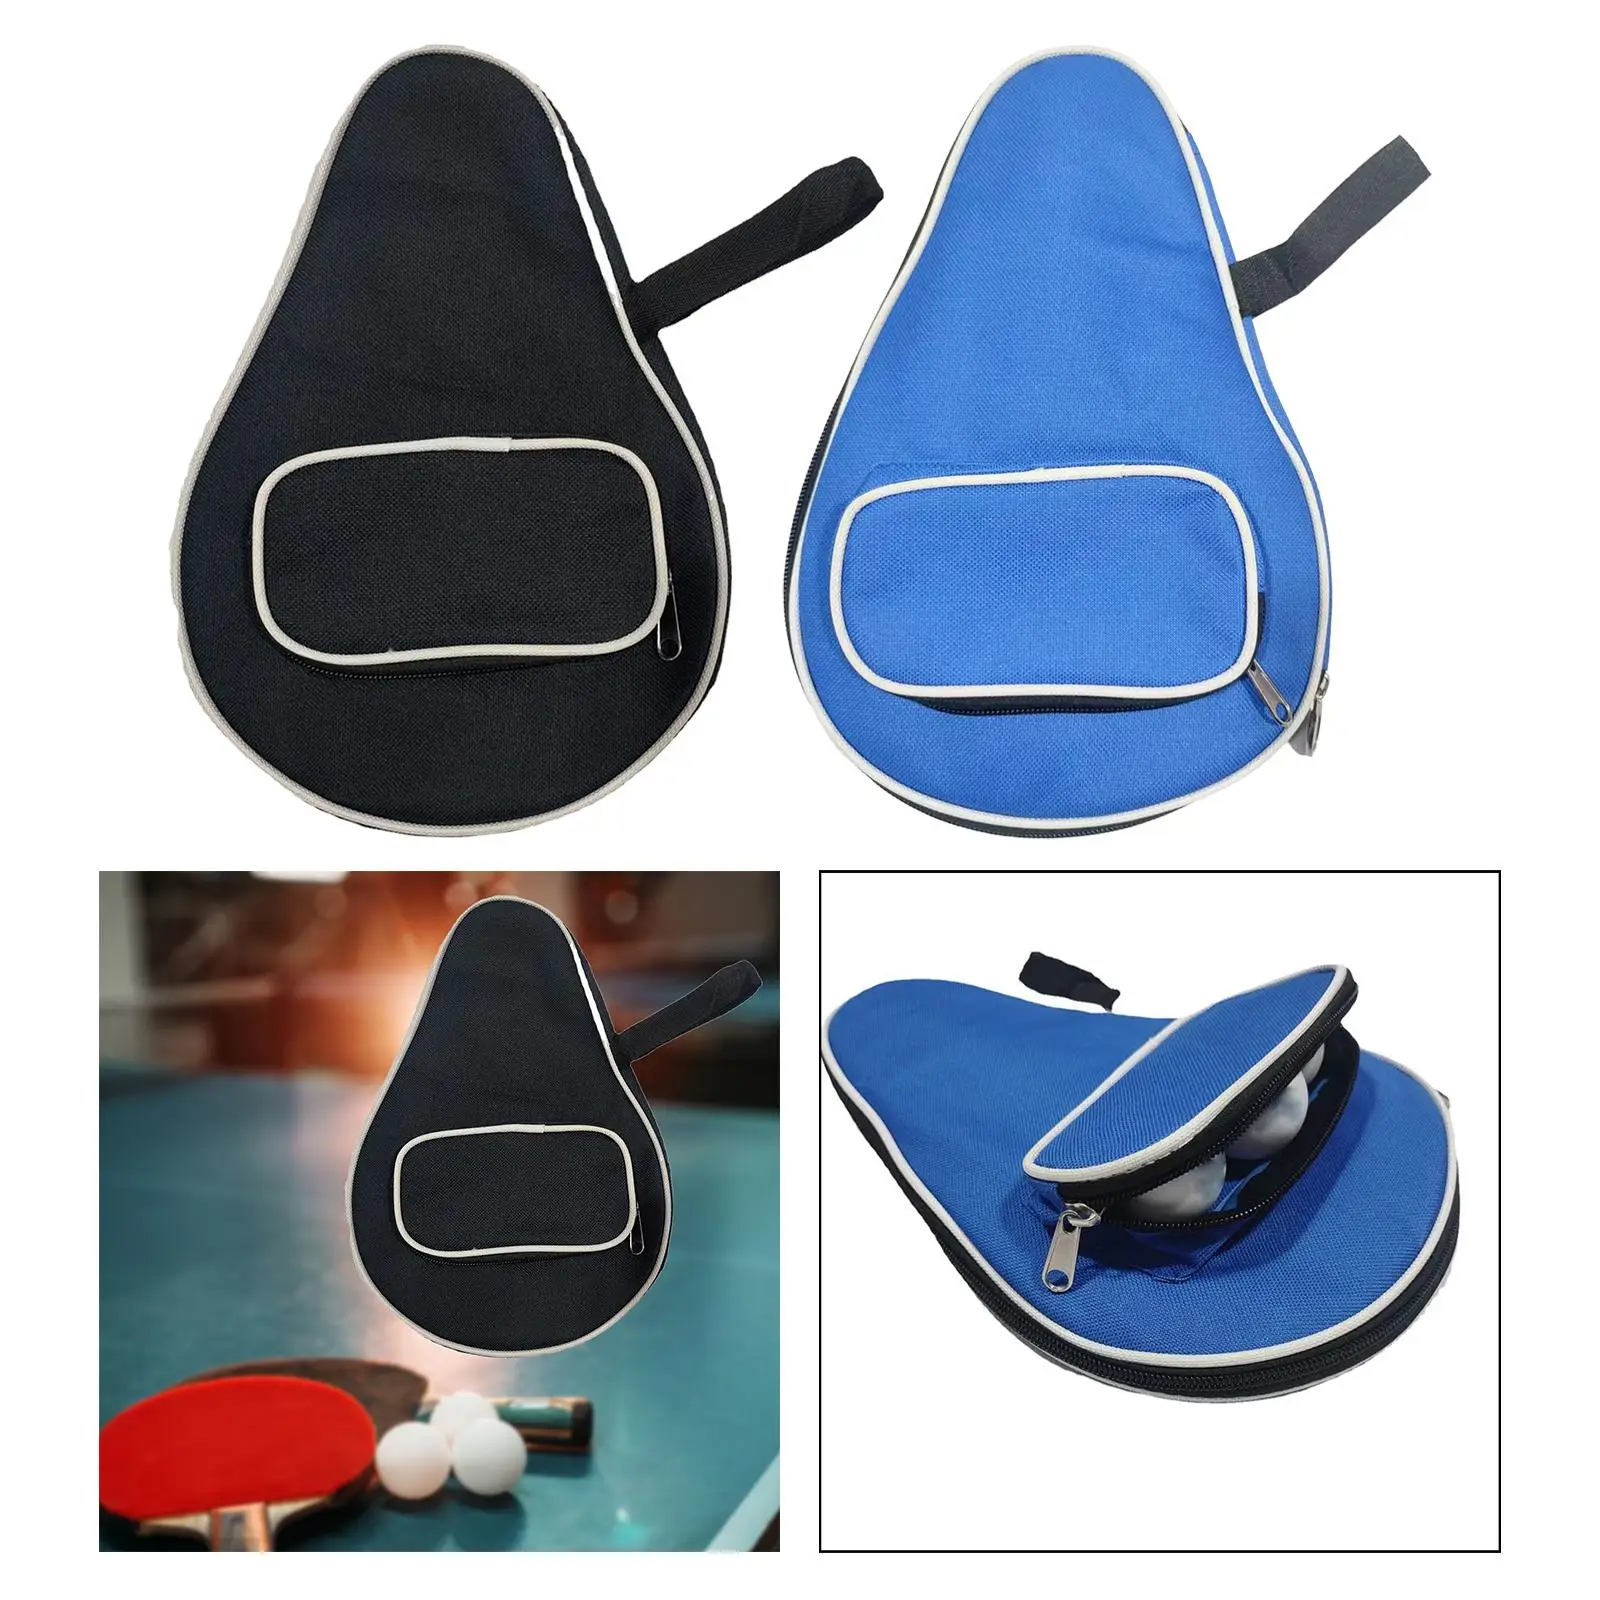 Table Tennis Racket Cover Dustproof Professional Wear Resistant Waterproof Table Tennis Paddle Case for Travel Outdoor Training